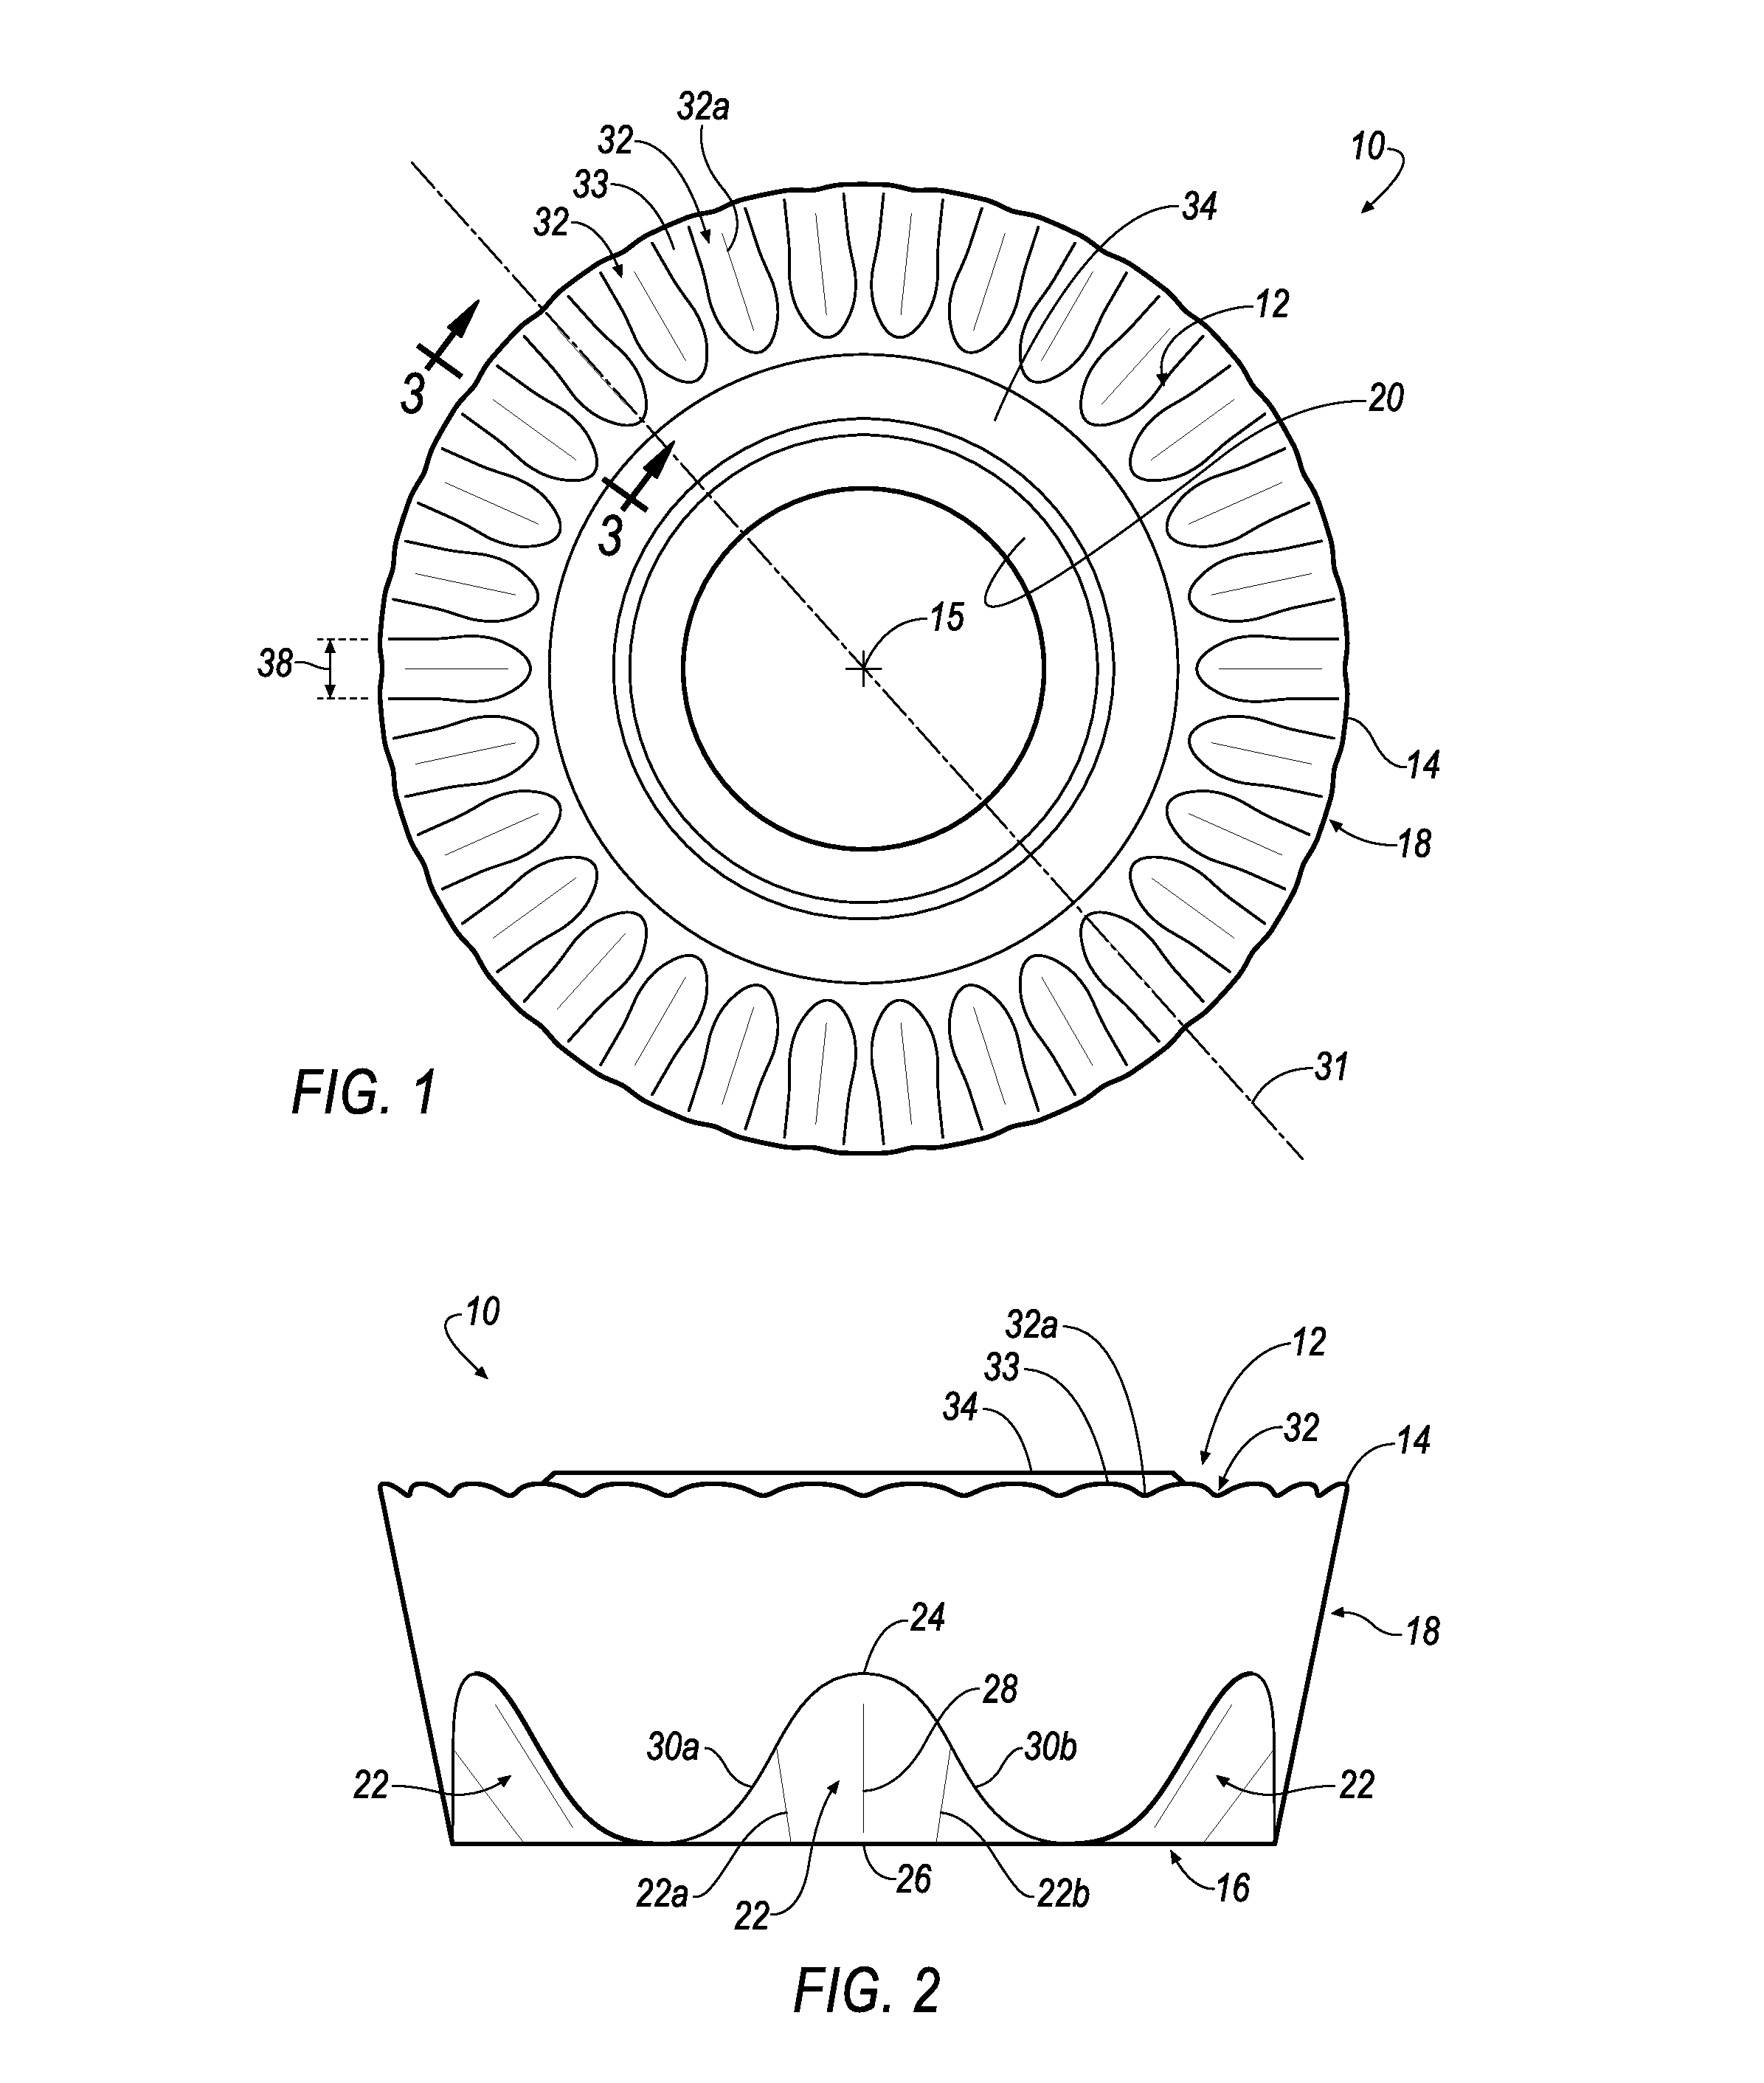 Round cutting insert with serrated topography